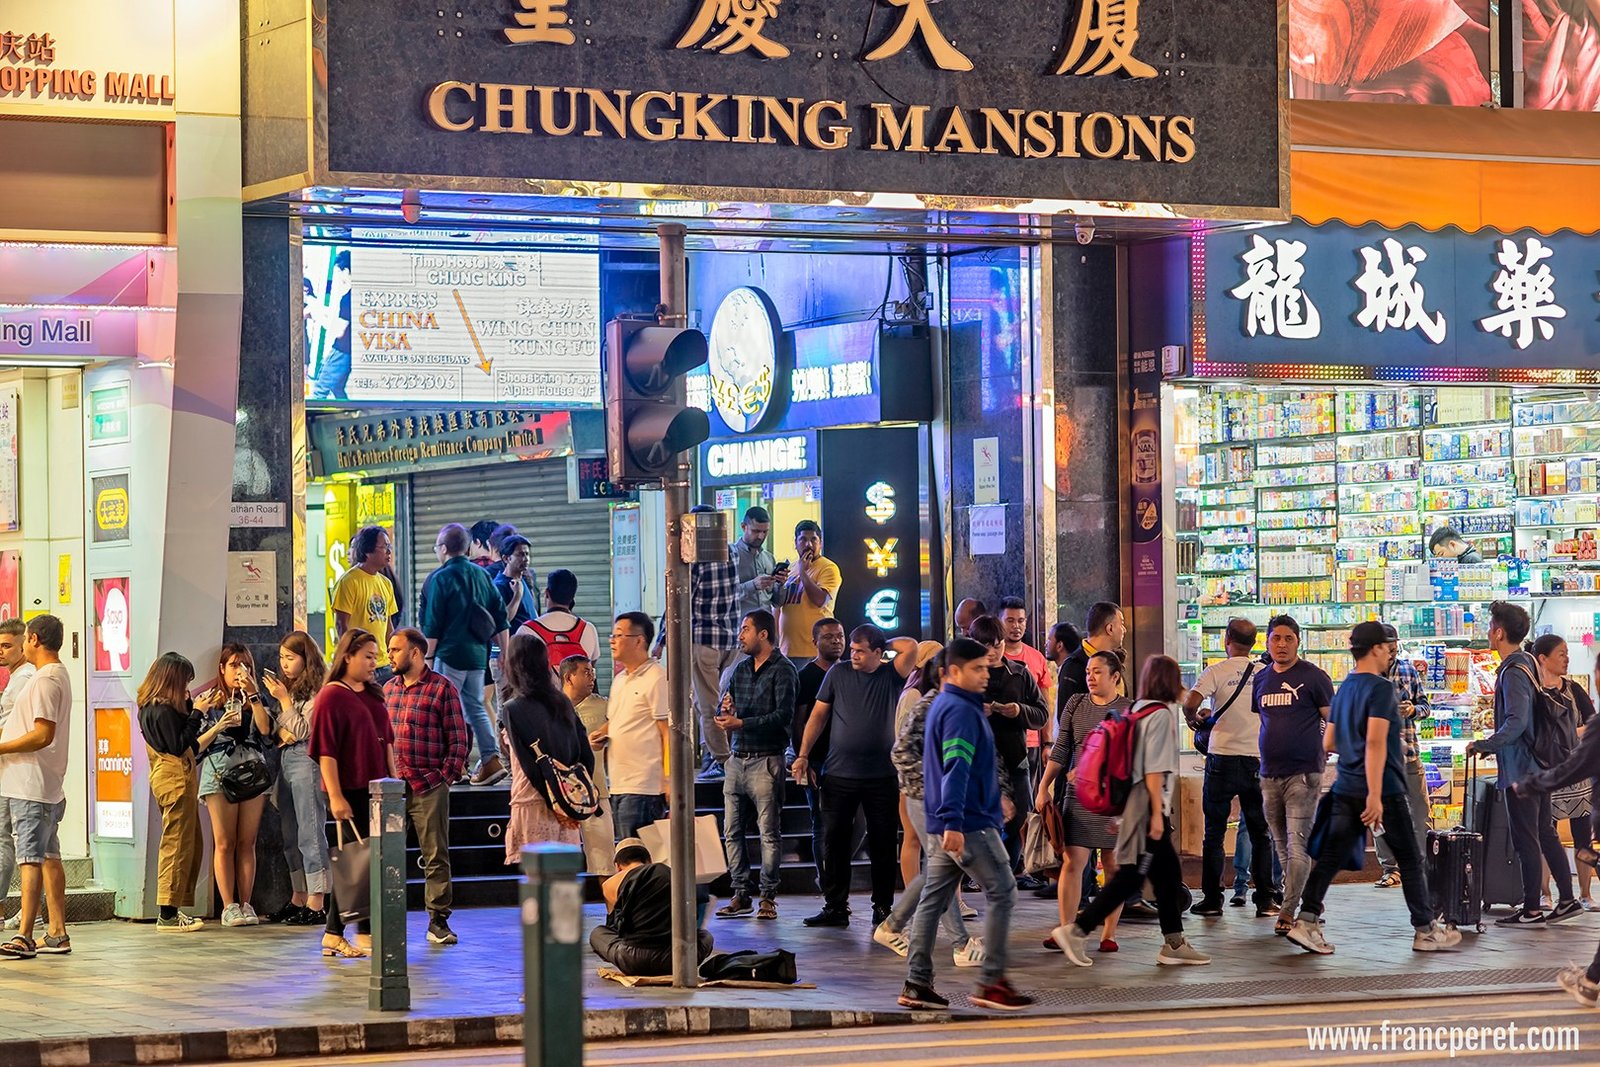 ChungKing Mansions main entrance on Nathan Road, Kowloon, with all the Indian guys trying to sale watches, tailor made suits or promoting rooms or restaurant.